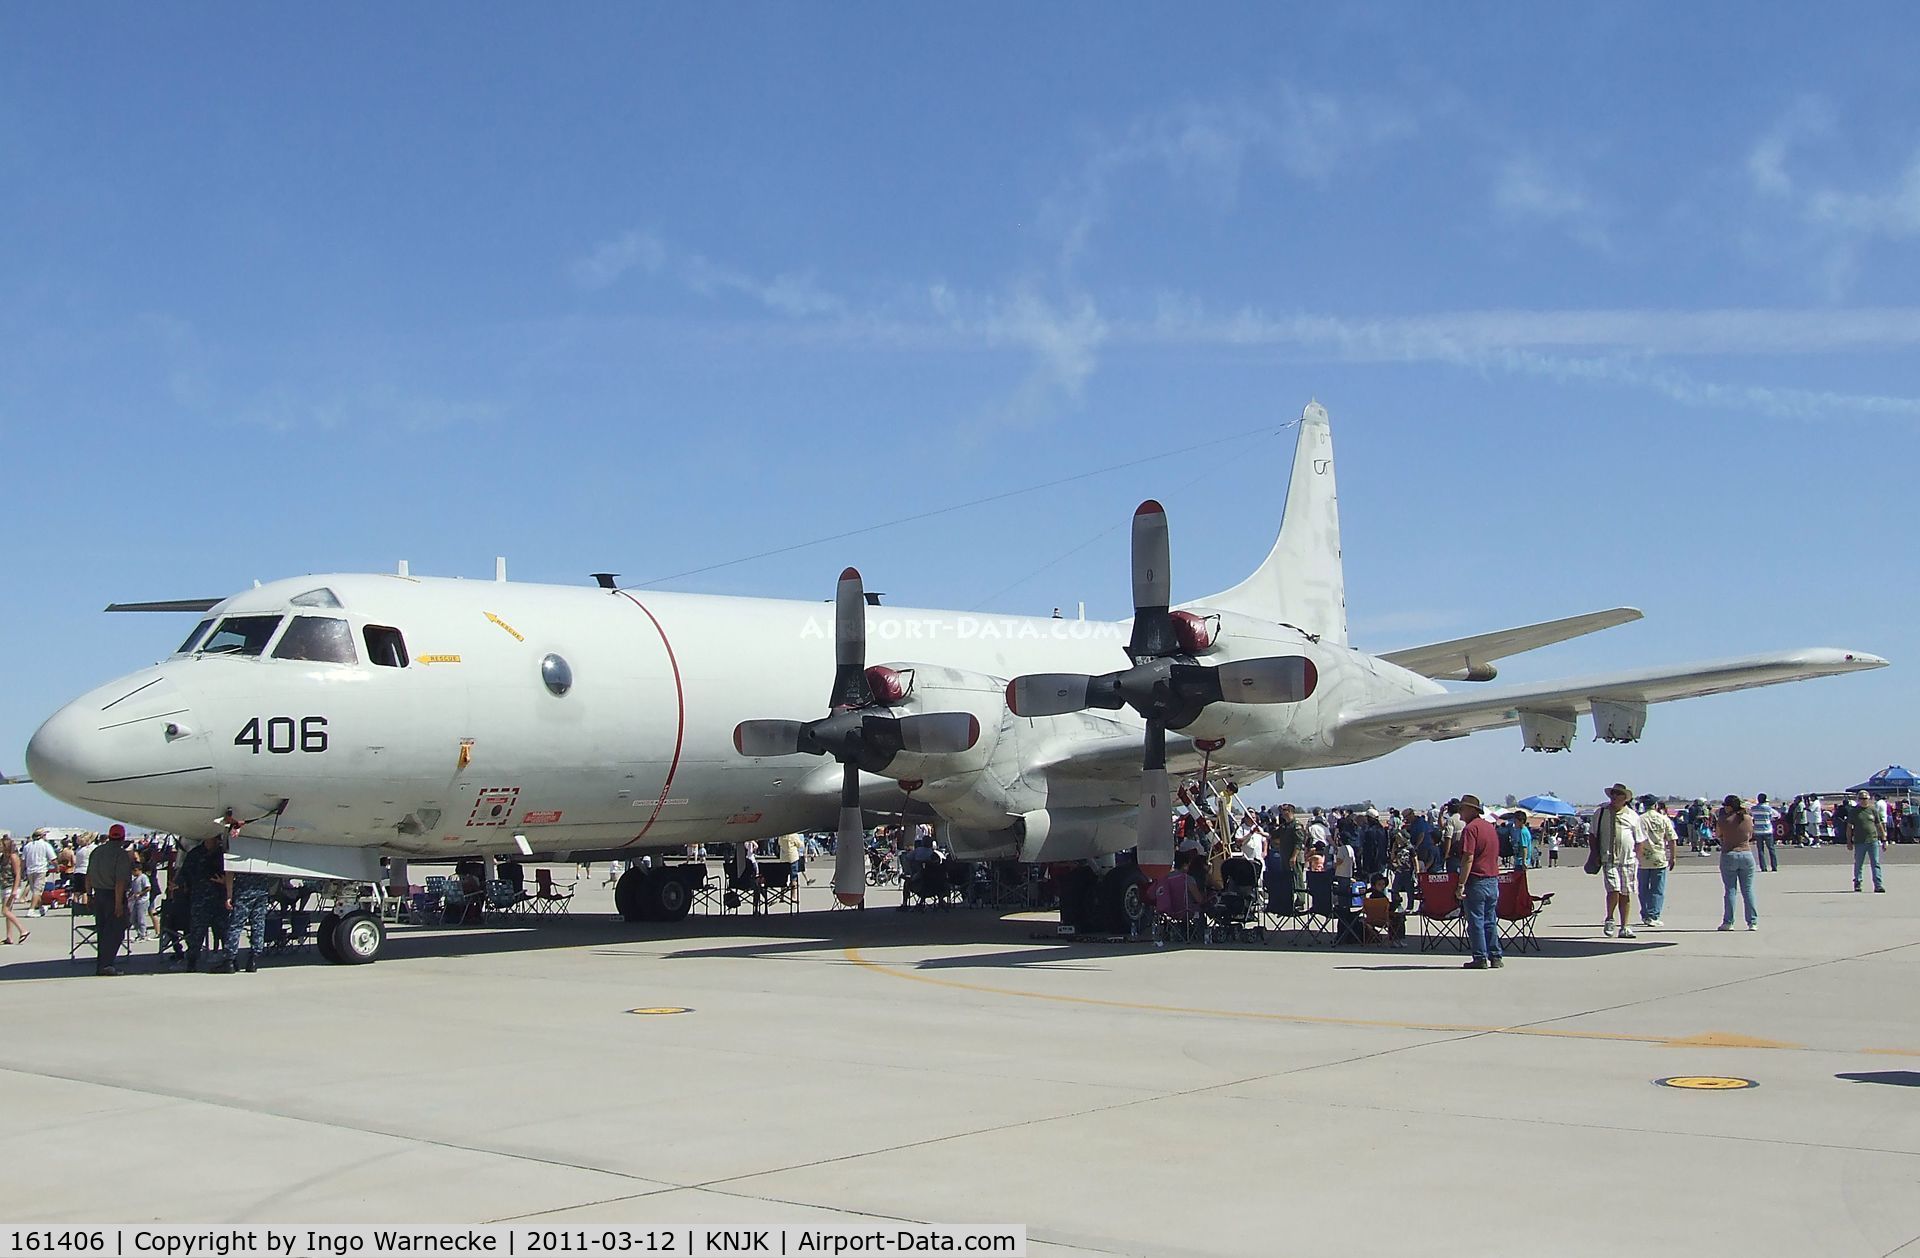 161406, Lockheed P-3C Orion C/N 285A-5743, Lockheed P-3C Orion of the US Navy  at the 2011 airshow at El Centro NAS, CA